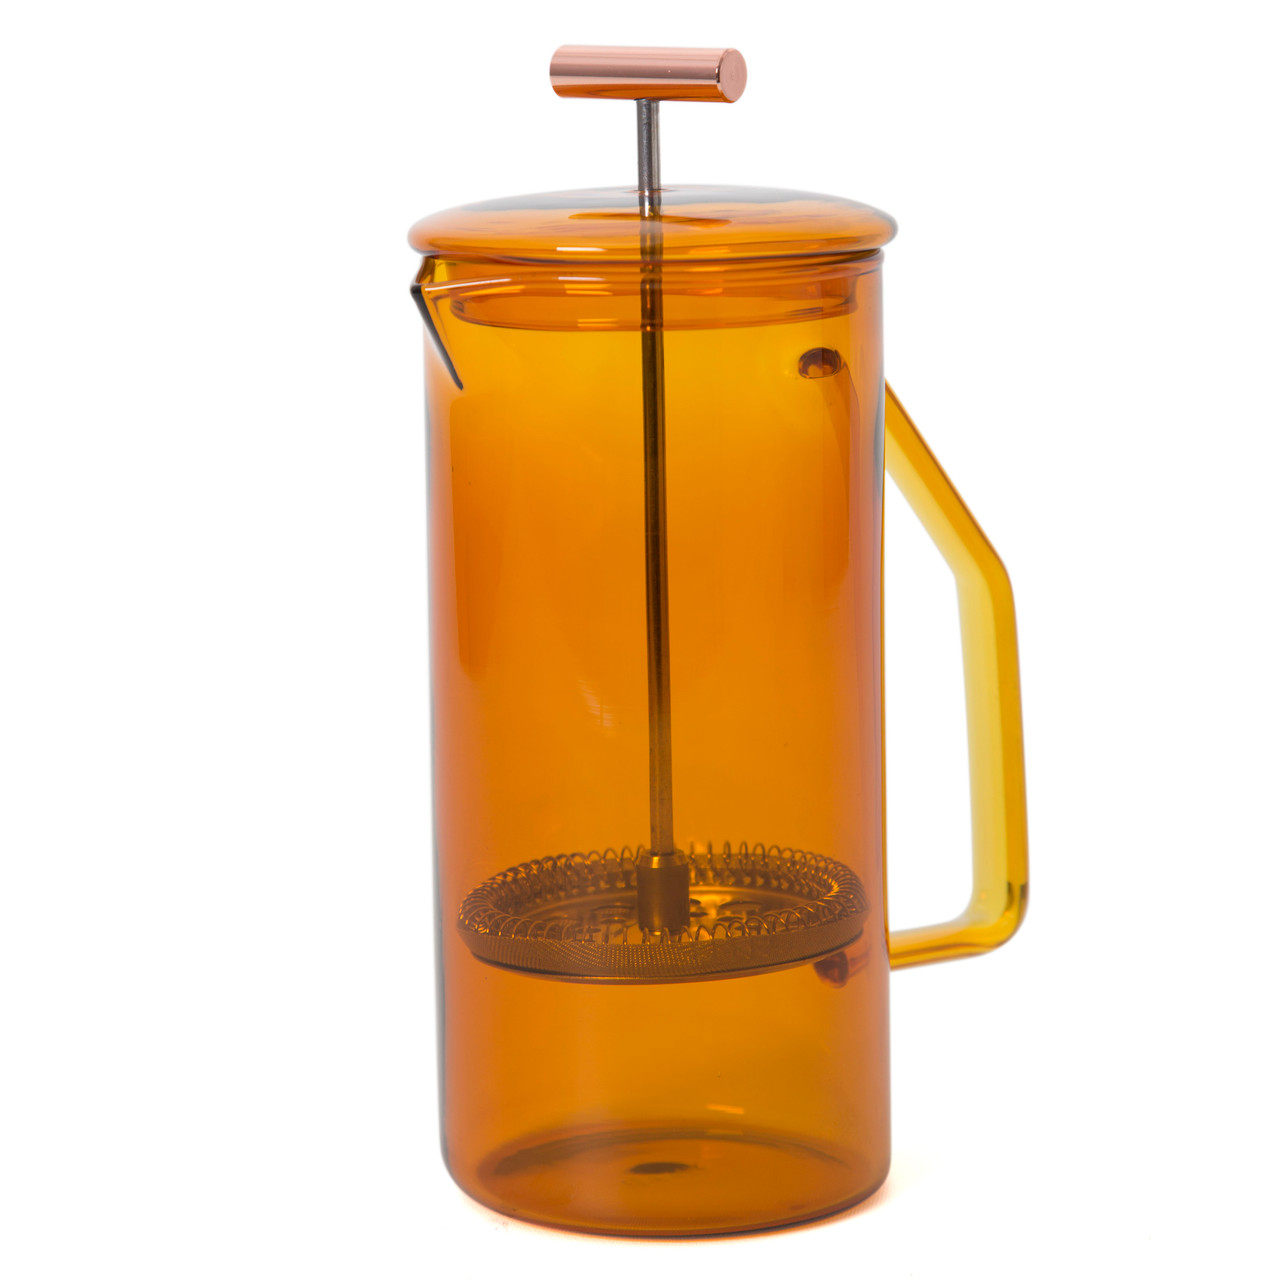 https://cdn11.bigcommerce.com/s-6h7ychjk4/images/stencil/1280x1280/products/9061/89037/yield-french-press-amber-glass-front-angle__78539.1597181148.jpg?c=1&imbypass=on